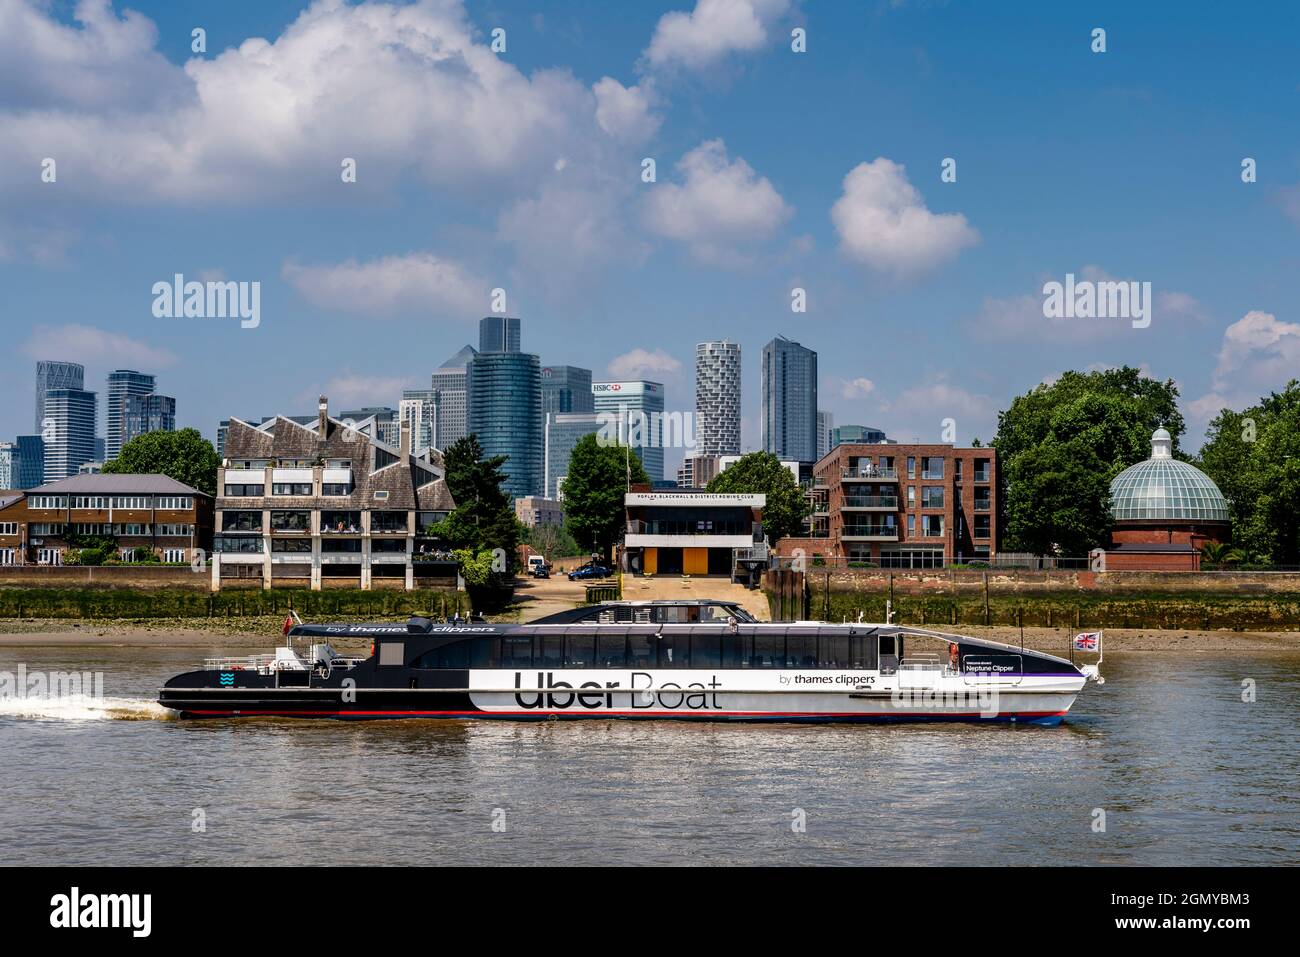 An Uber Boat On The River Thames, London, UK. Stock Photo